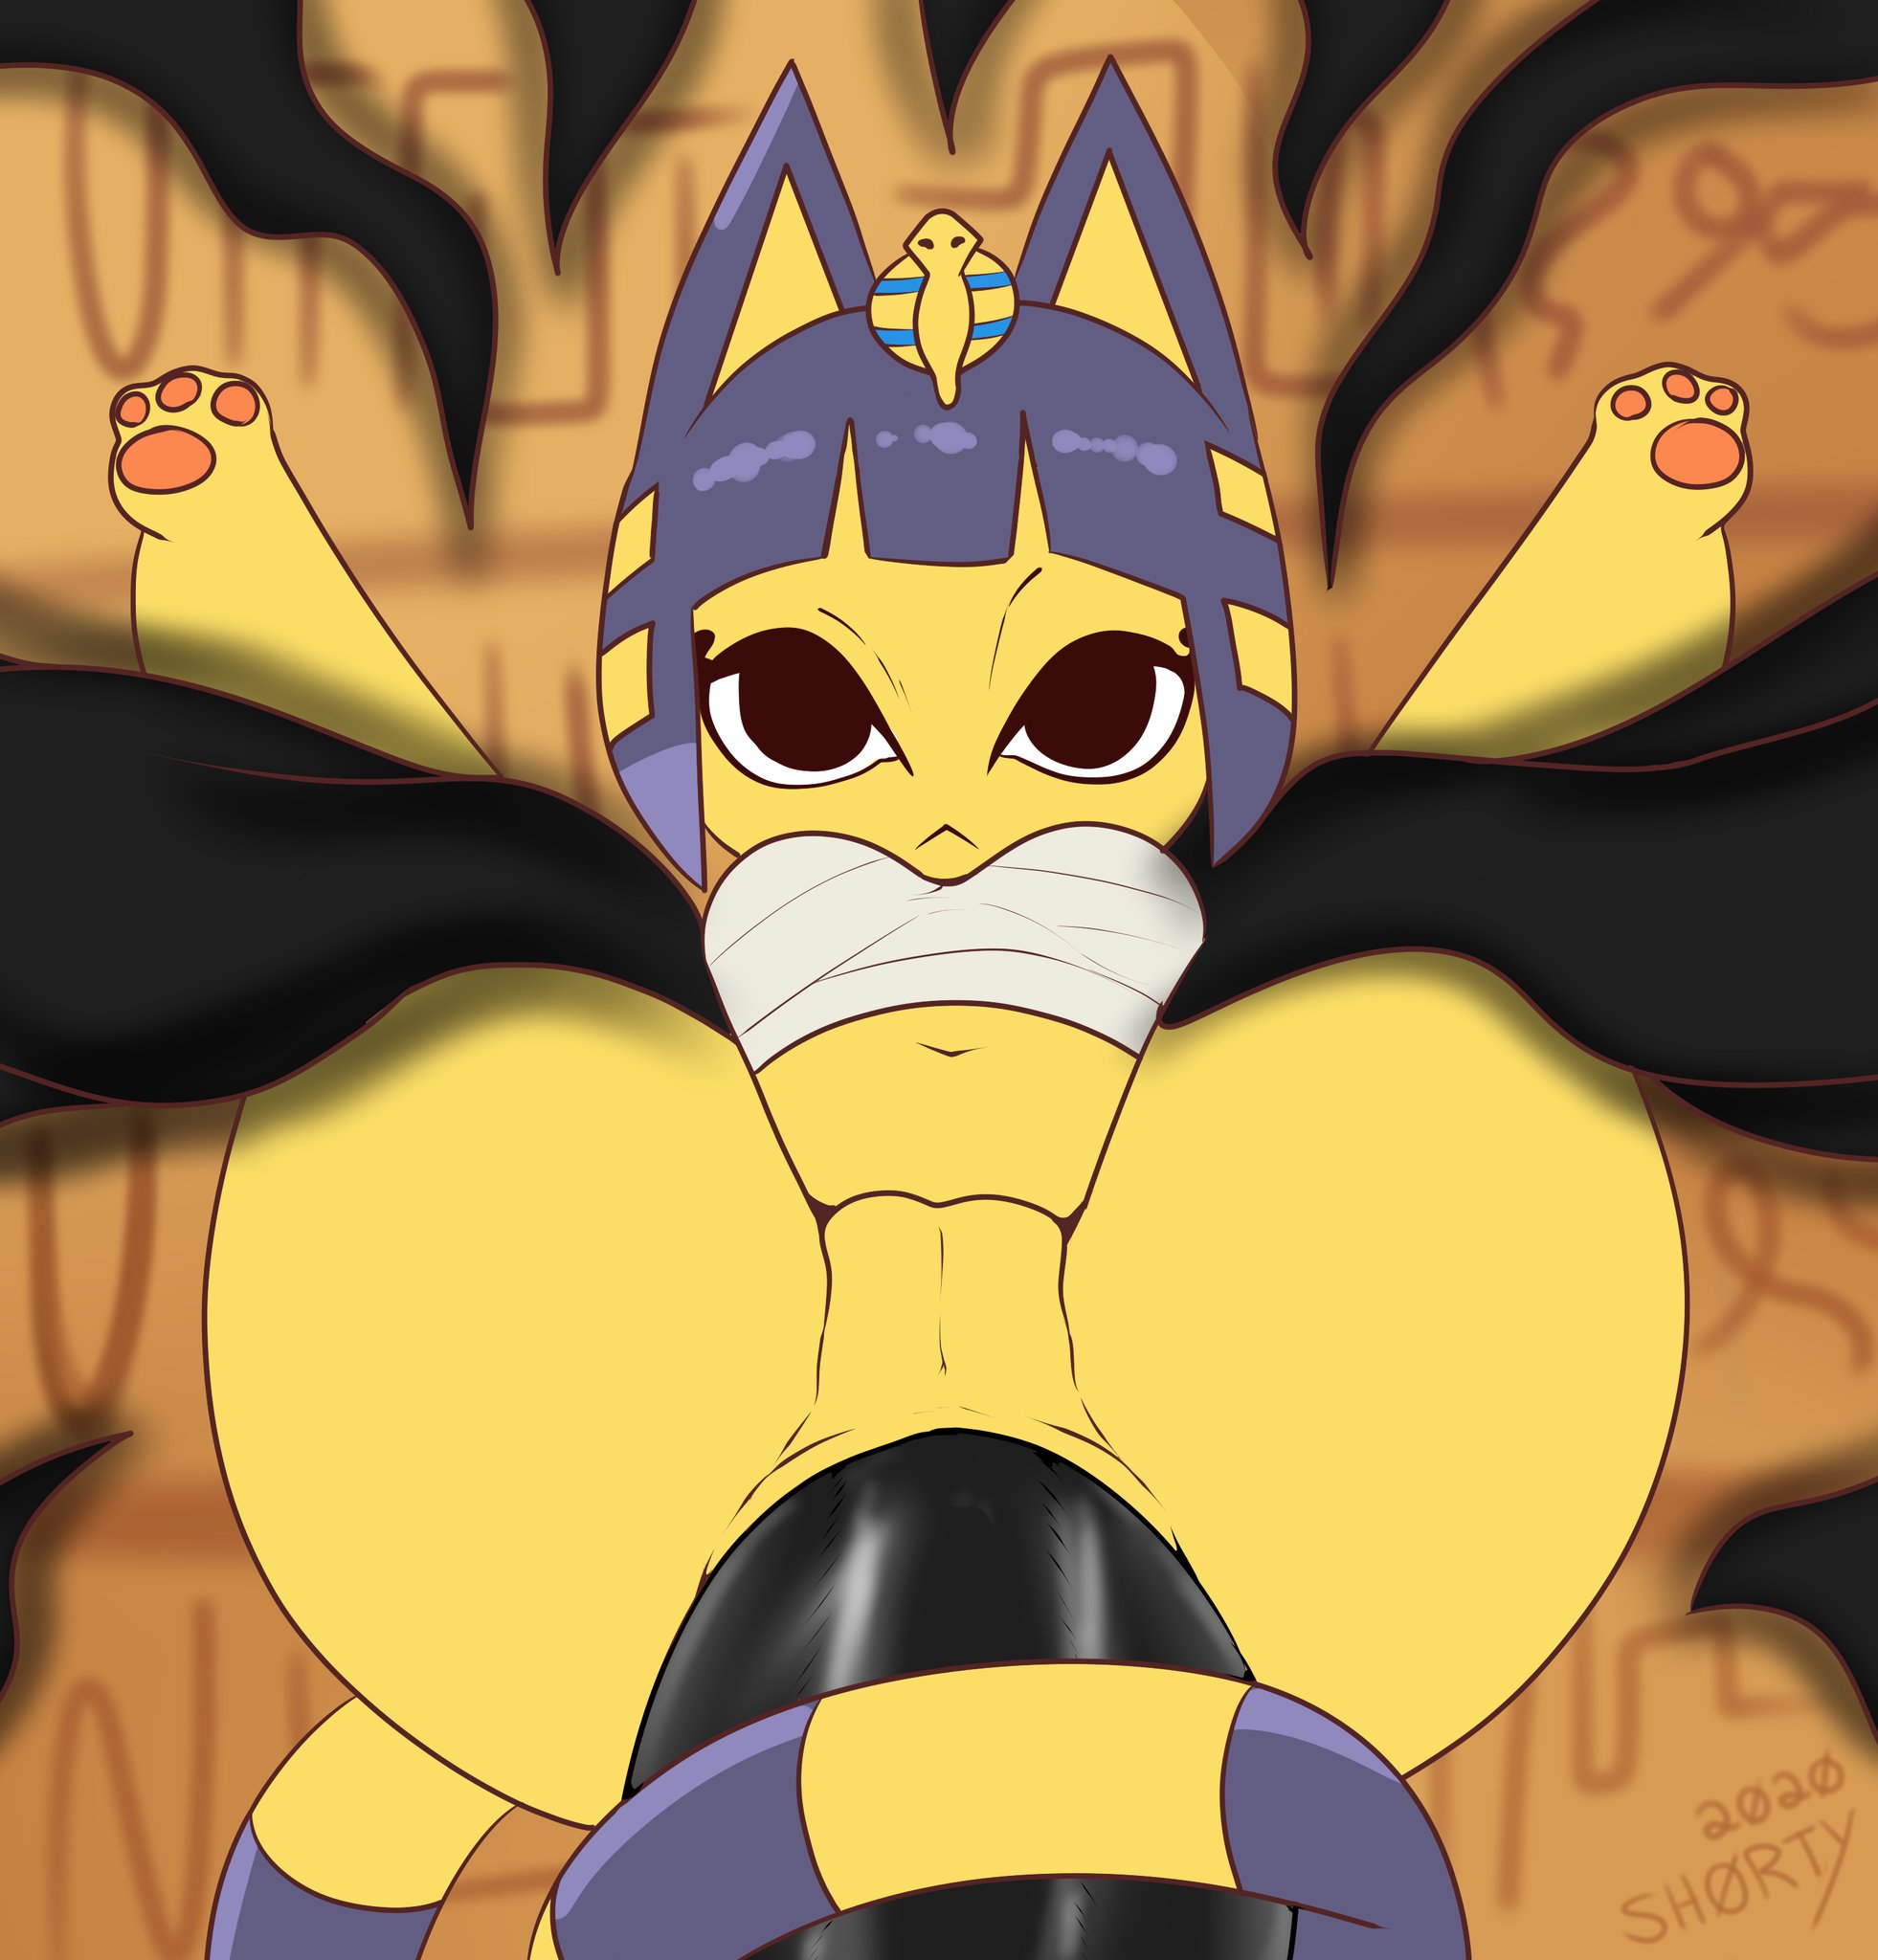 1. Ankha is queen. 